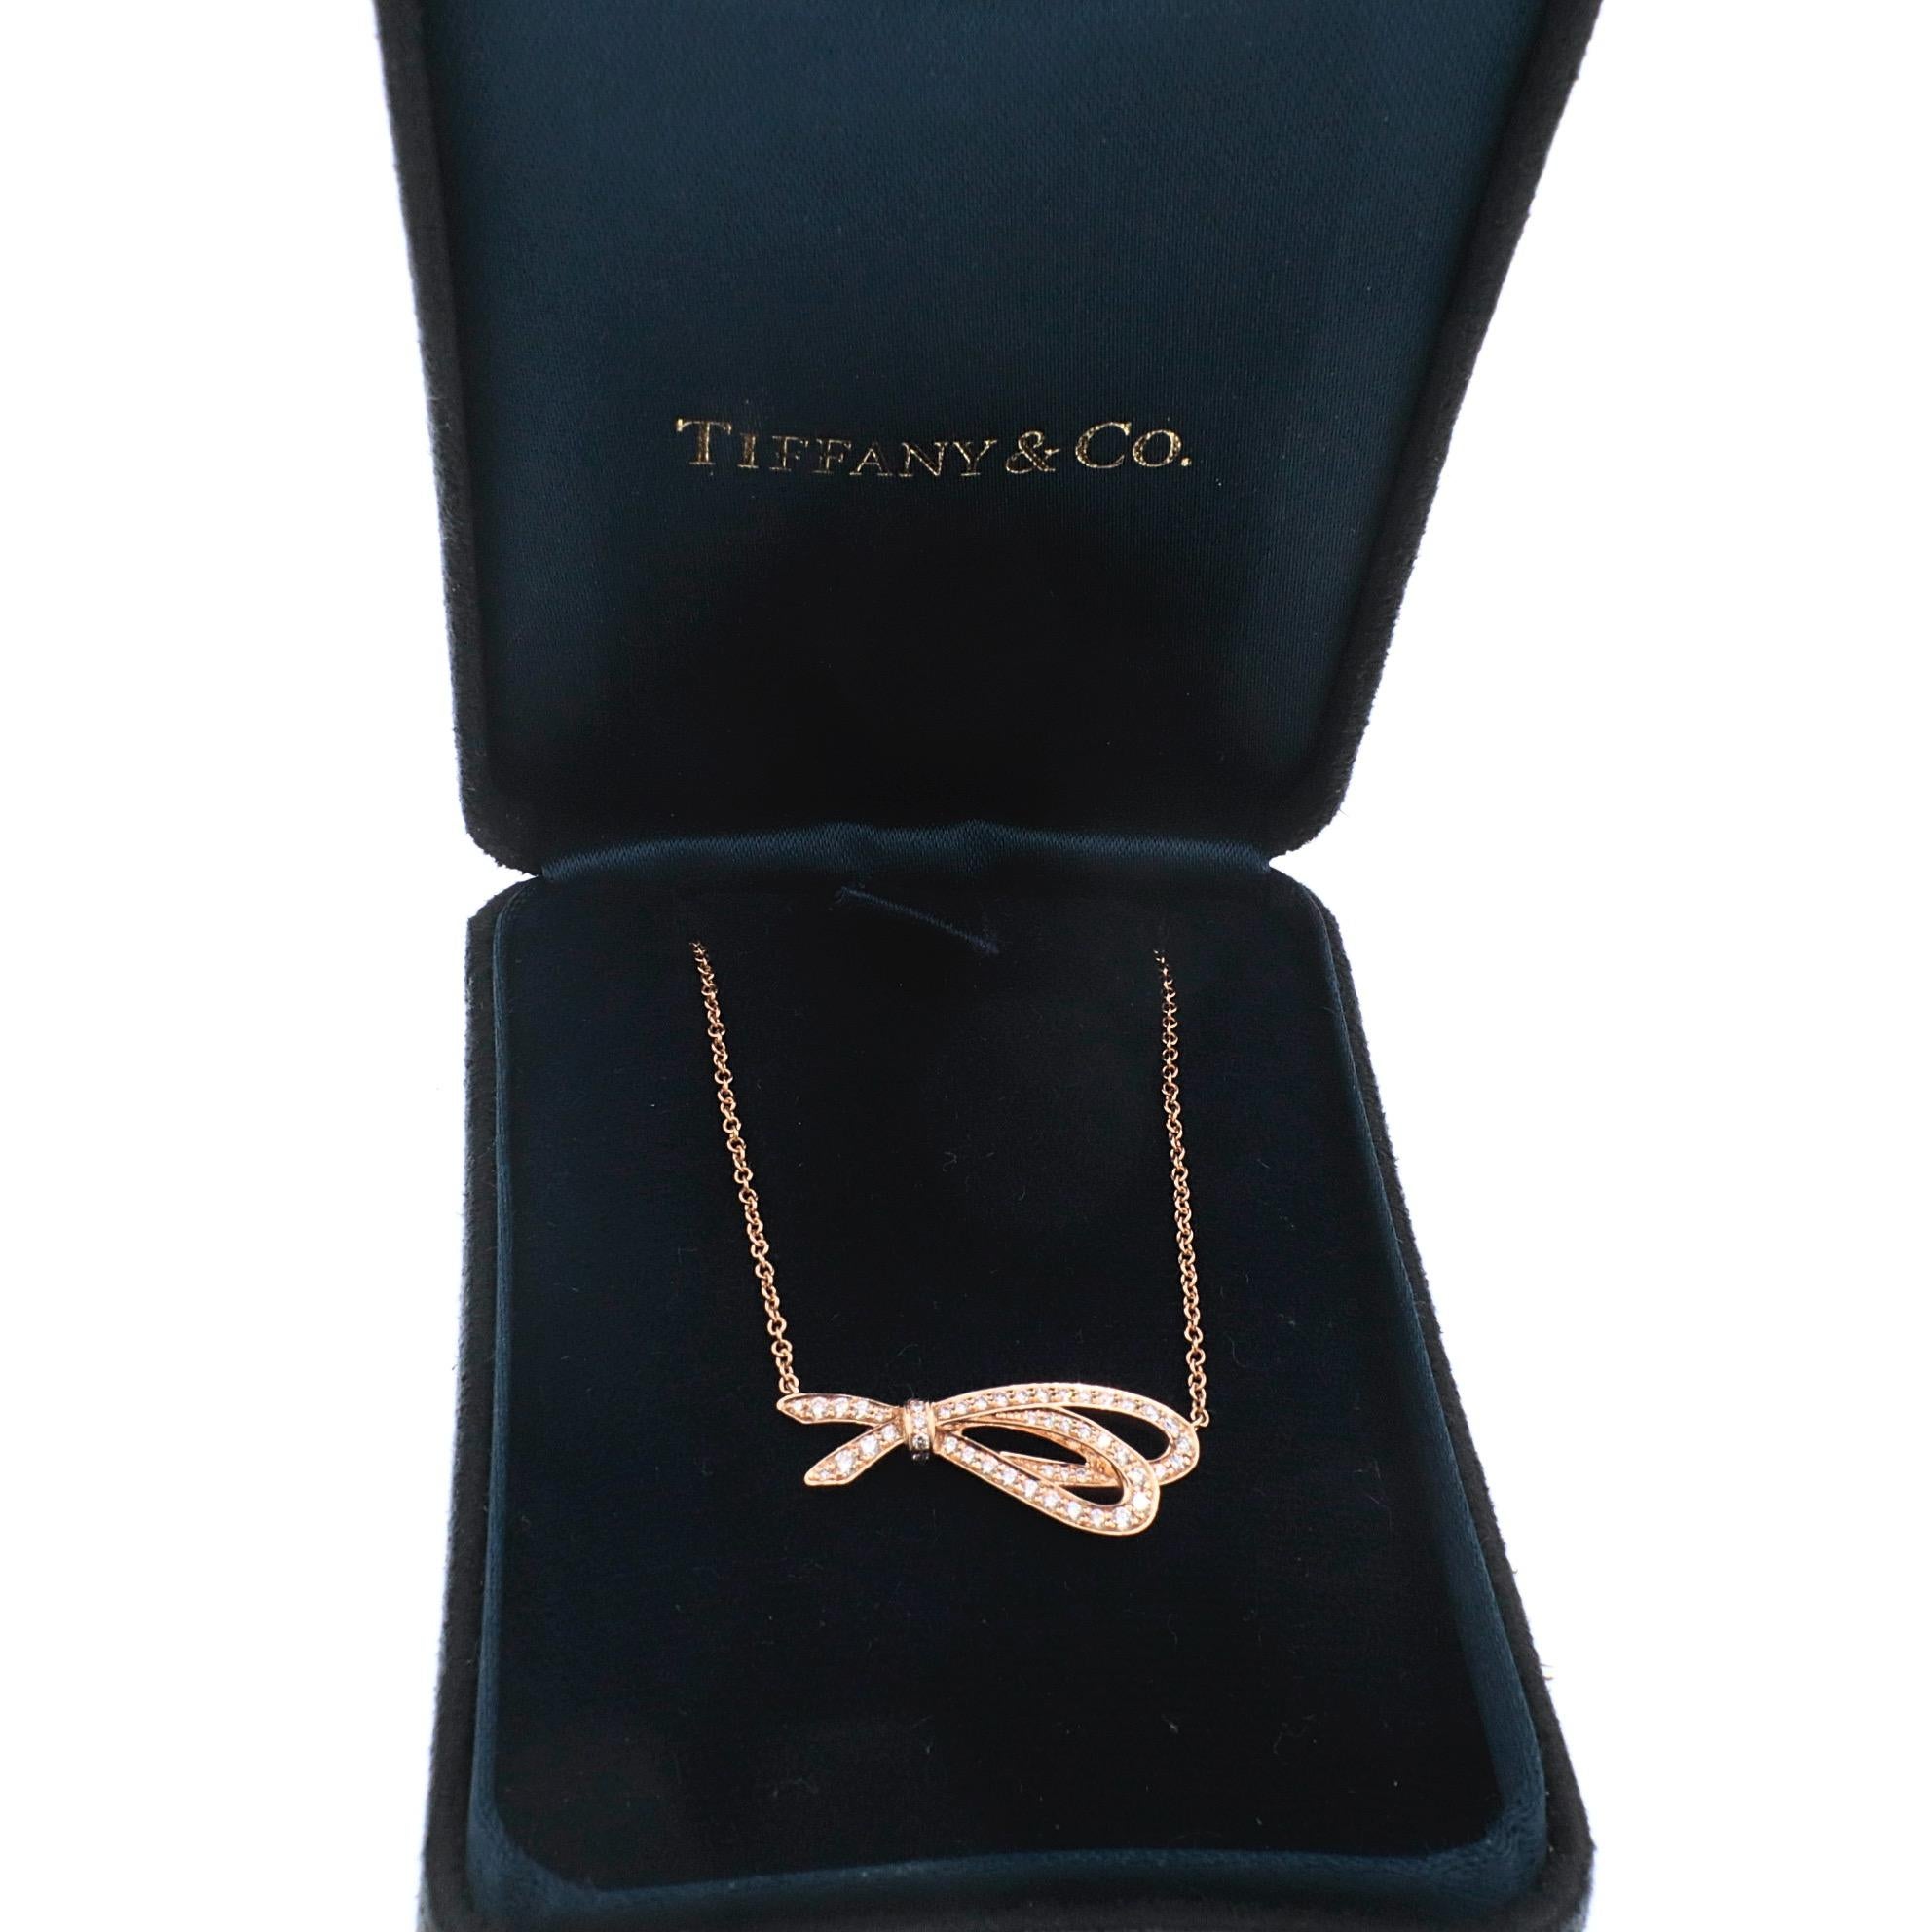 Tiffany & Co. Diamond Bow Pendant Necklace 18 Karat Rose Gold In Excellent Condition For Sale In San Diego, CA